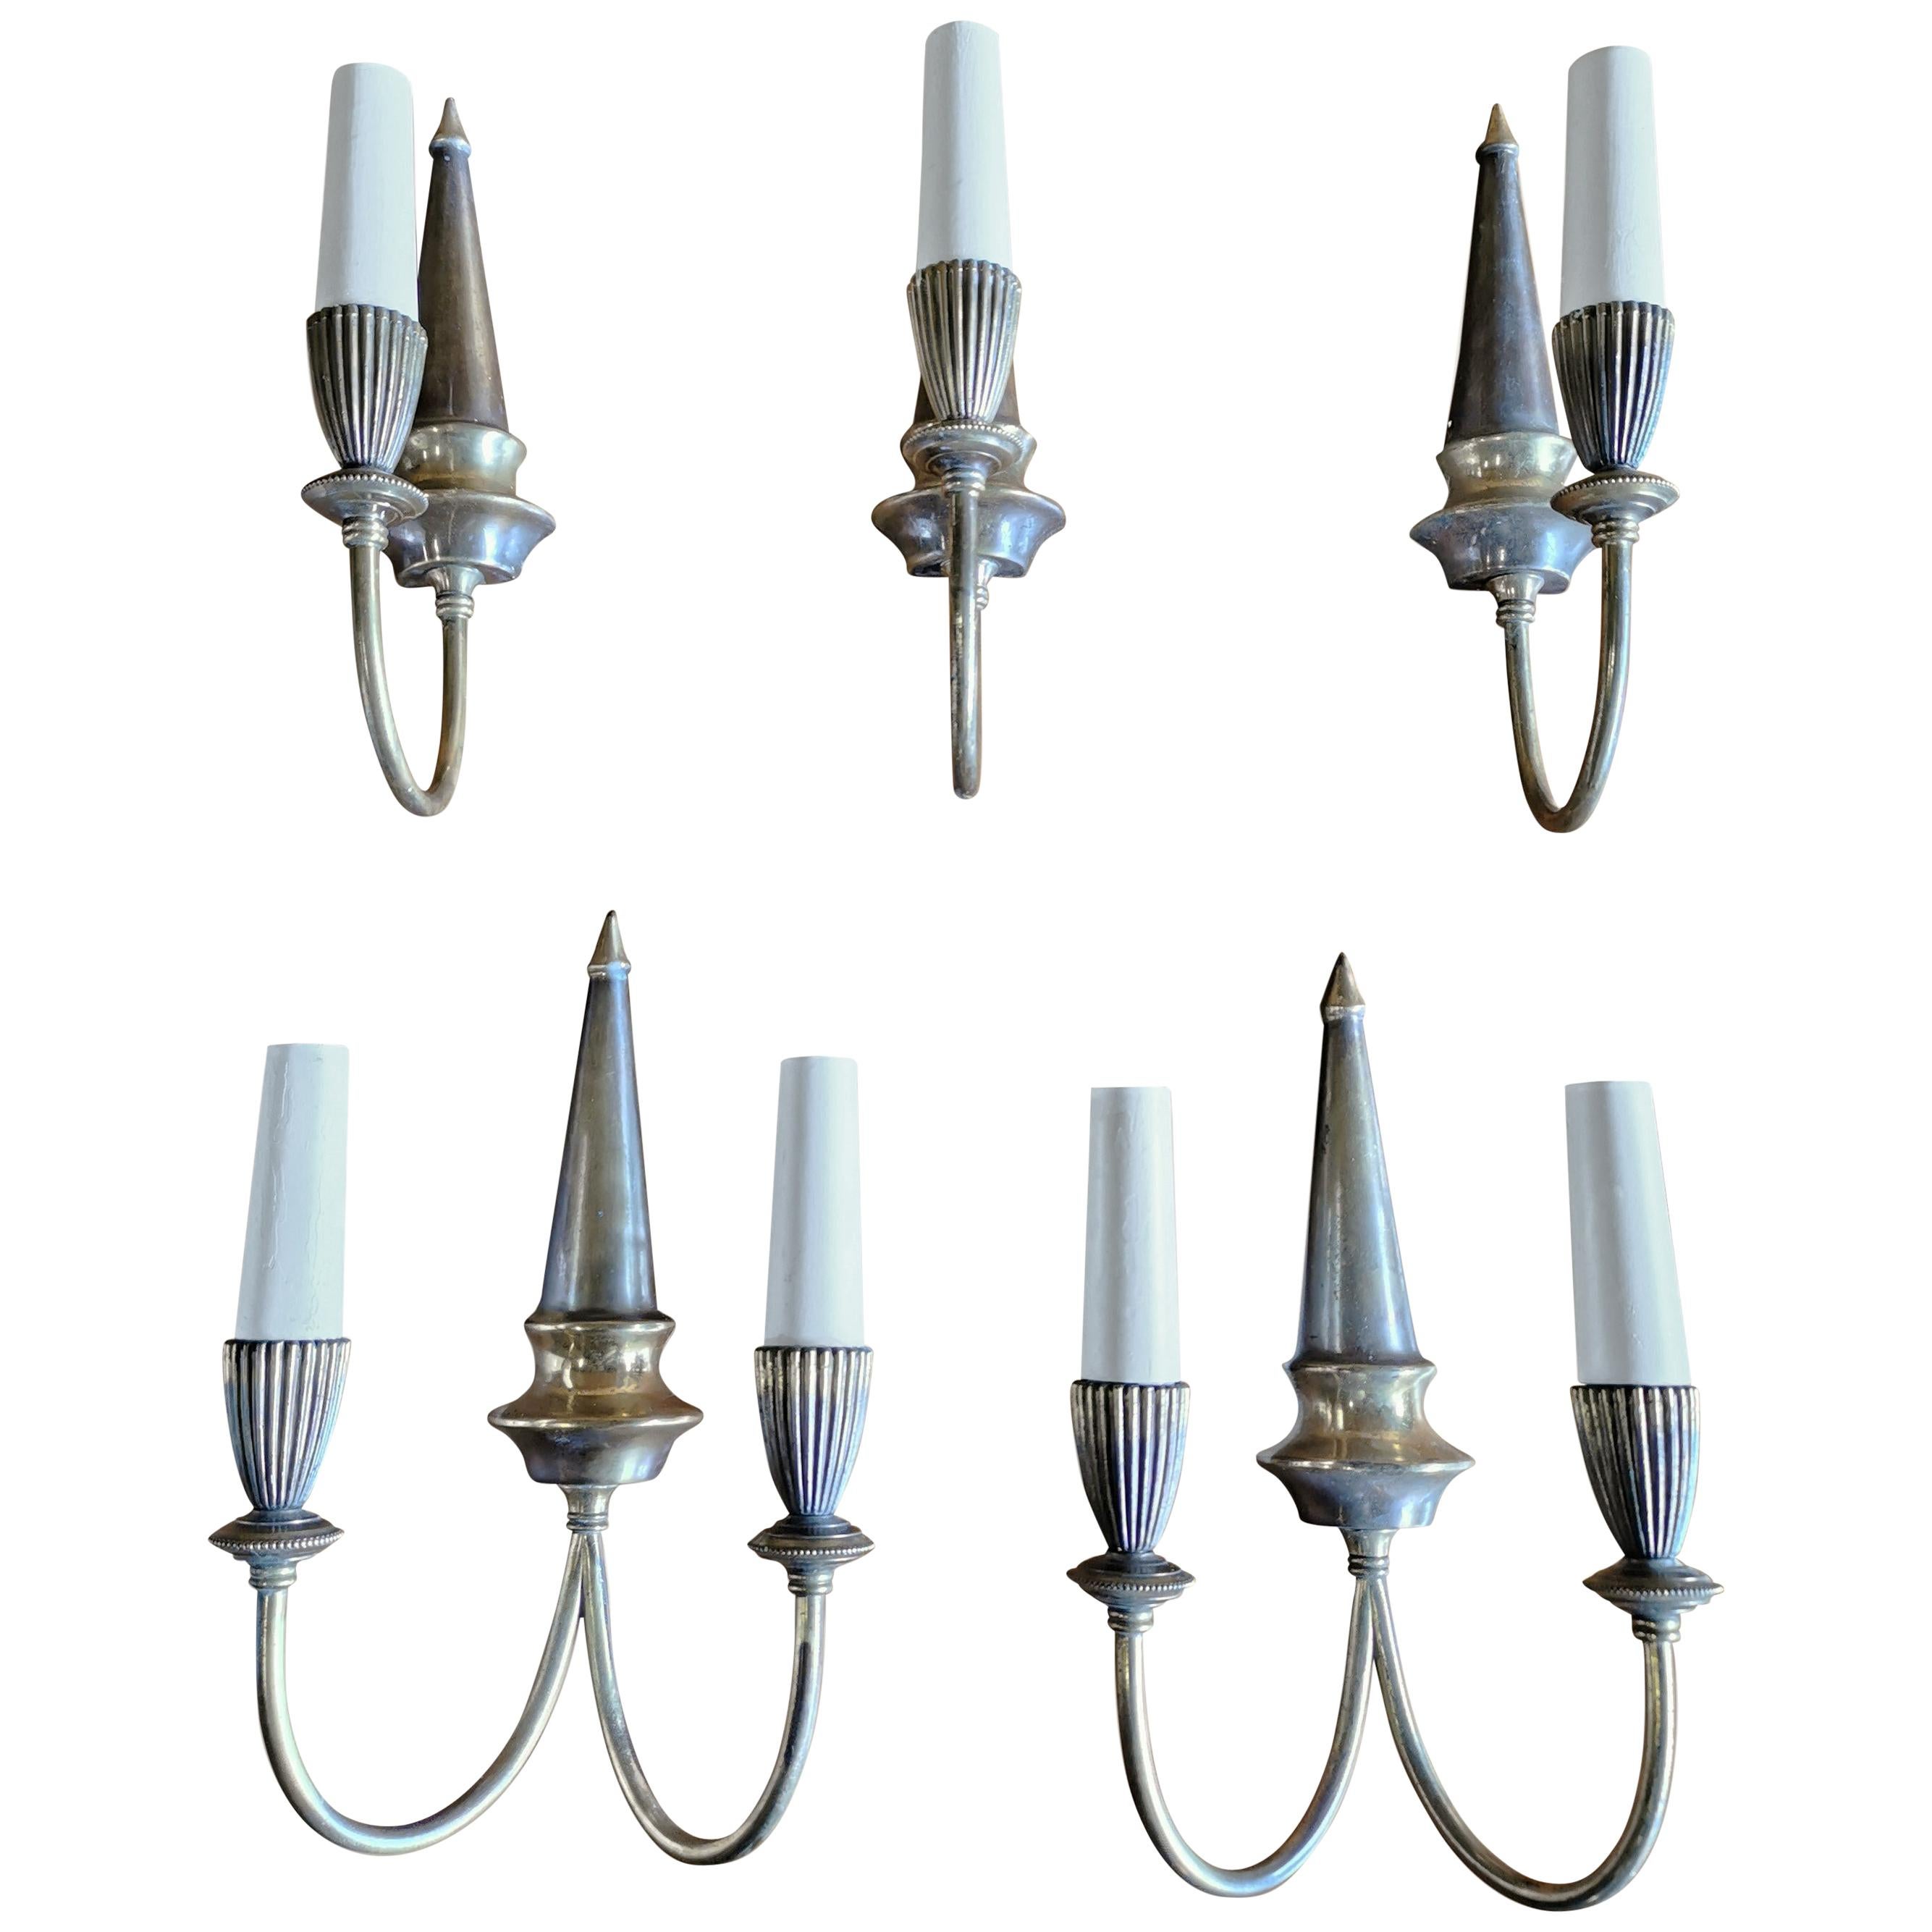 Suite of Solid Bronze Neoclassical Sconces, France, 1950s